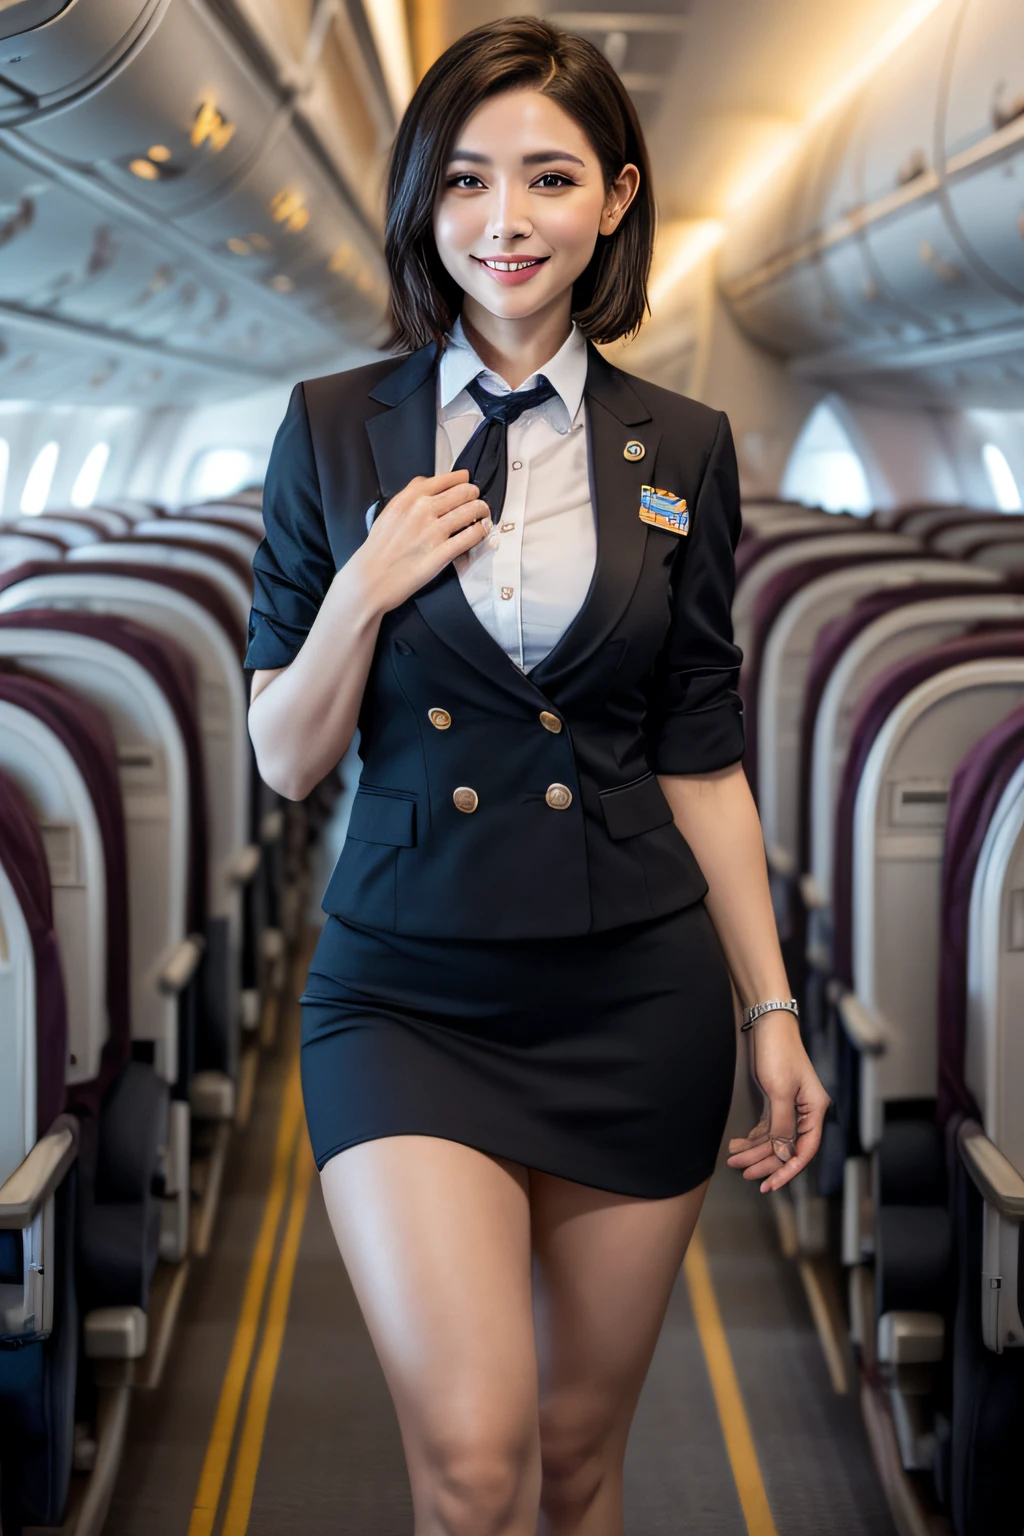 1womanl, 40 years、hyperdetailed face、Detailed lips、A detailed eye、double eyelid、(Black bob hair、Smiling while walking gracefully down the aisle)、(Stewardess uniform:1.2)、(Glamorous body)、(Colossal tits)、thighs thighs thighs thighs, Perfect fit, Perfect image realism, Background with: (Business Class aisle on airplanes:1.2), Cowboy Shot, Meticulous background, detailed costume, Perfect litthing、Hyper-Realism、(Photorealsitic:1.4)、8K maximum resolution, (​masterpiece), ighly detailed, Professional